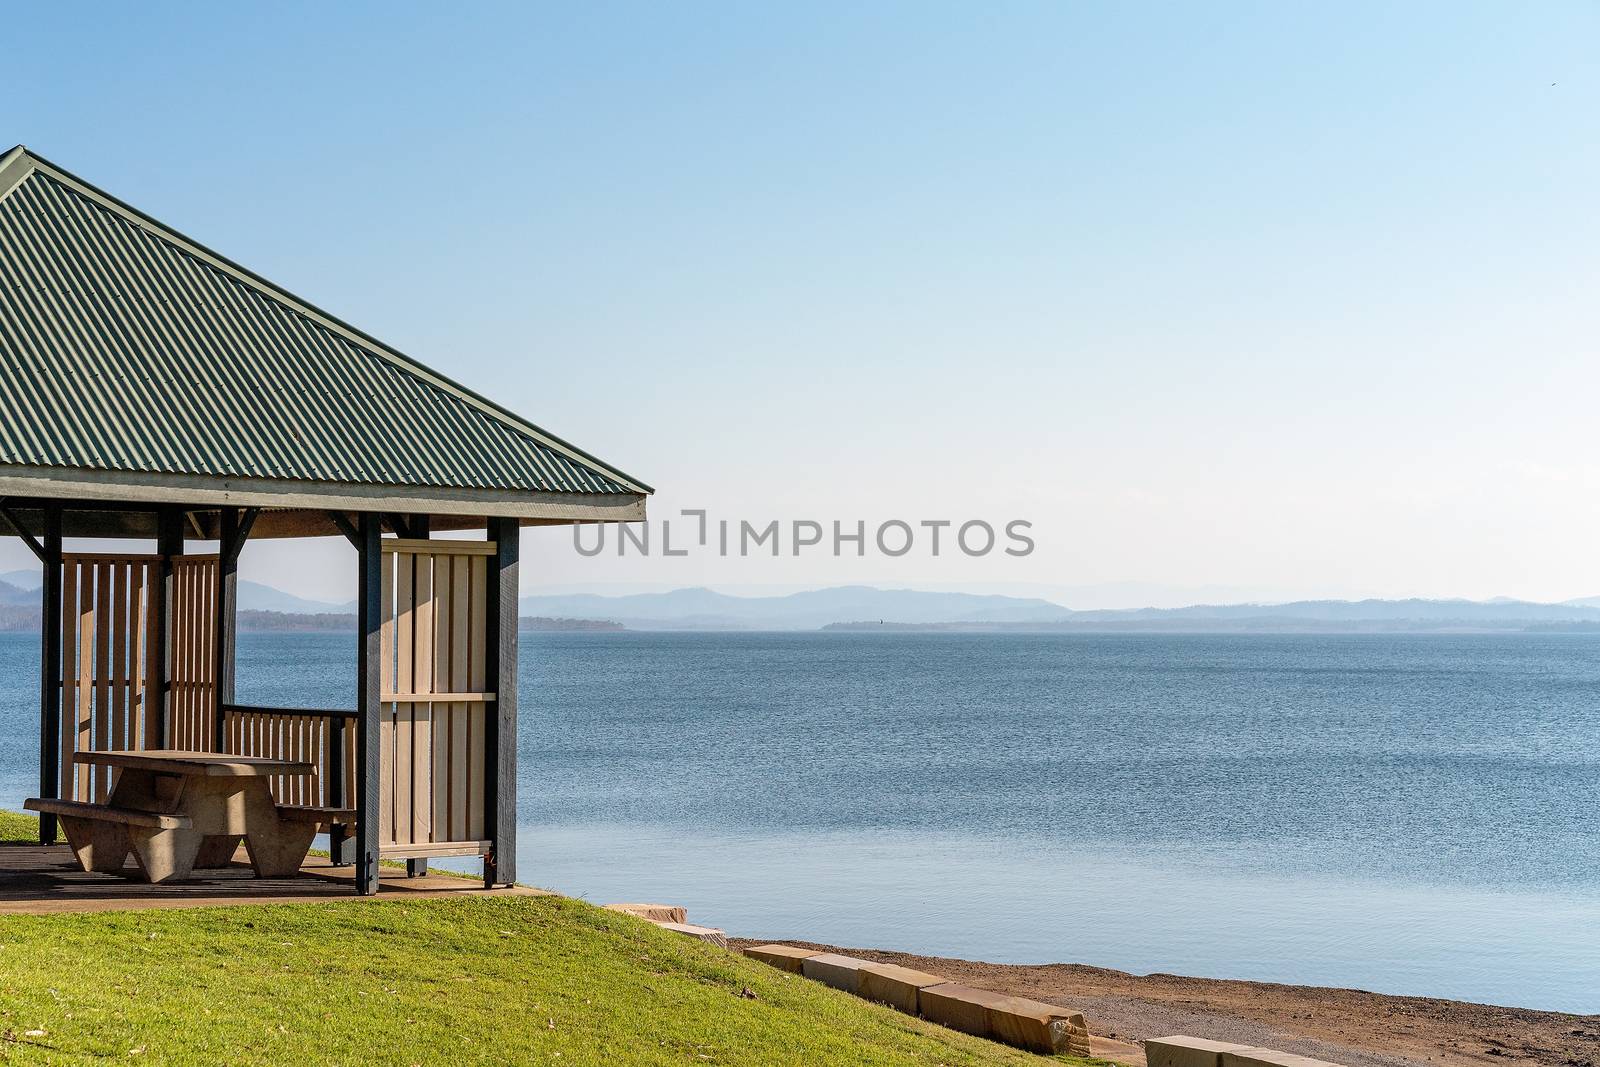 Shaded structure with verandah suitable for the public to relax at a dam popular for recreation